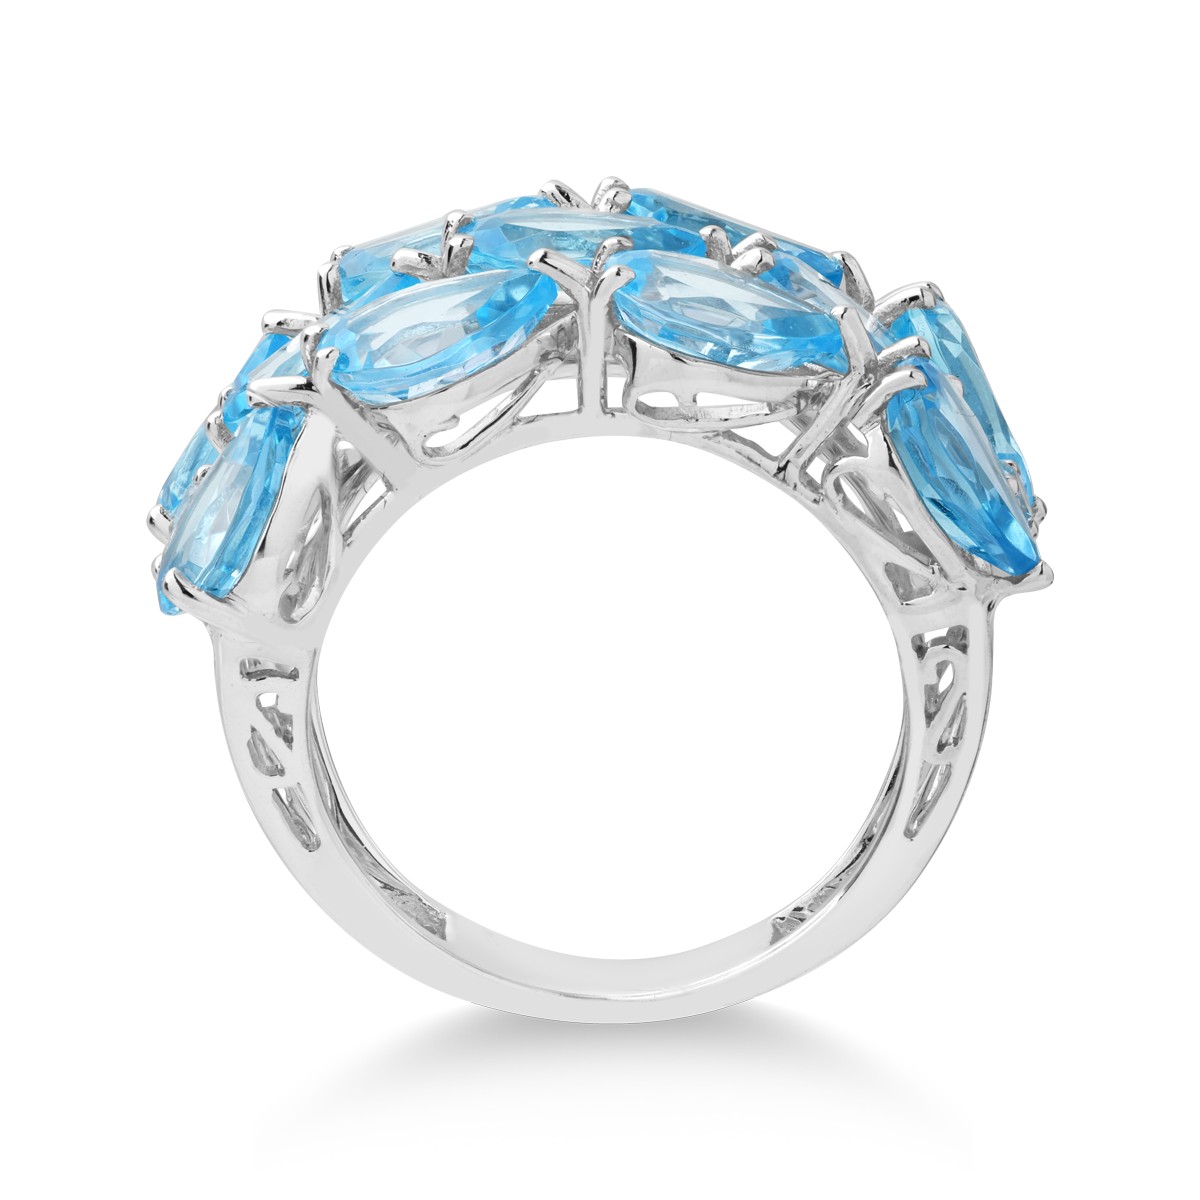 14K white gold ring with 9.56ct blue topaz